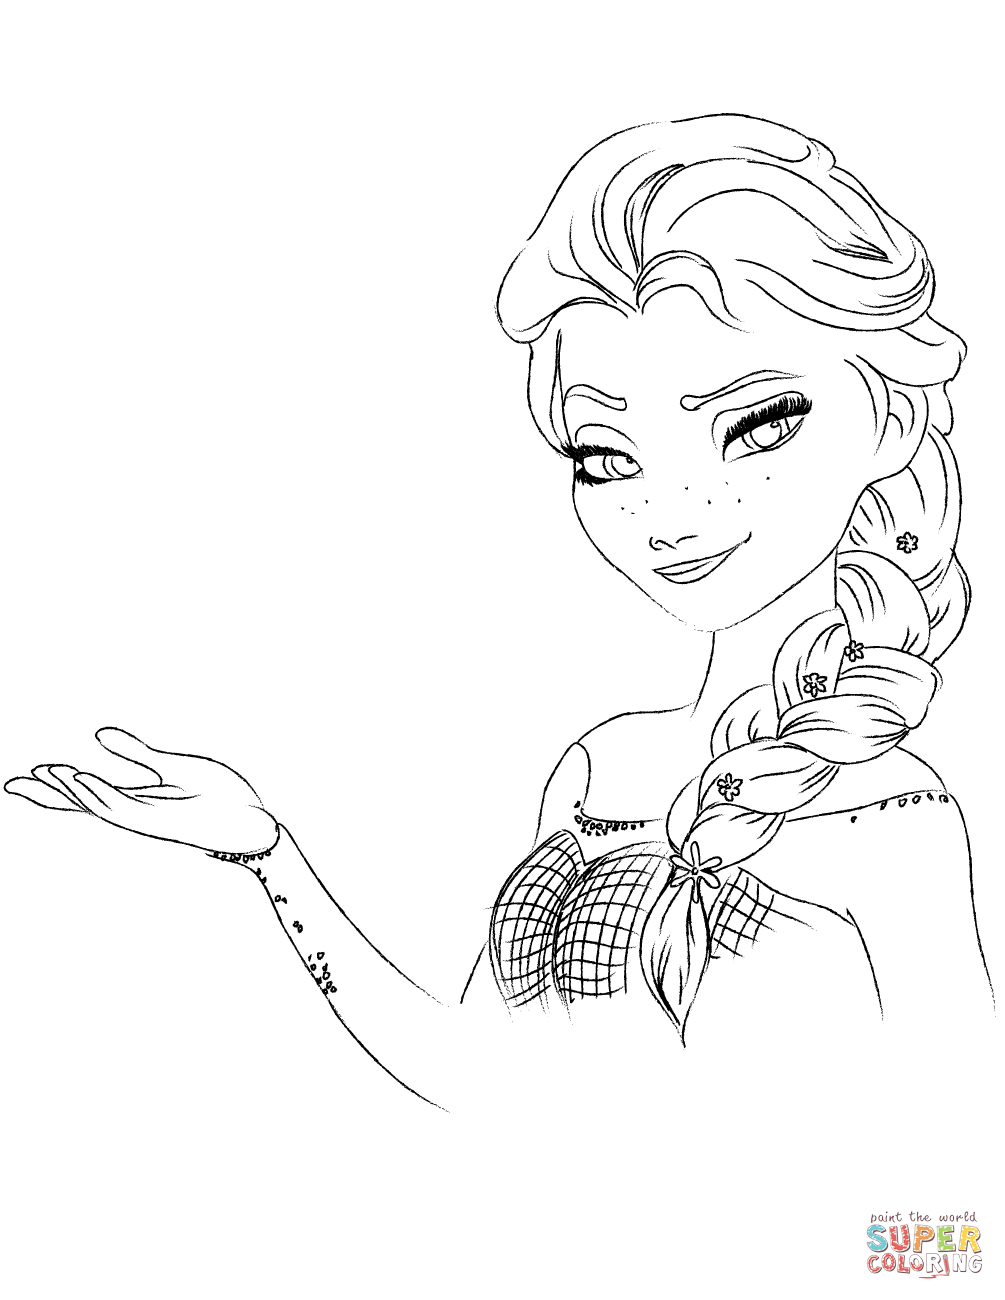 The Frozen coloring pages | Free Coloring Pages